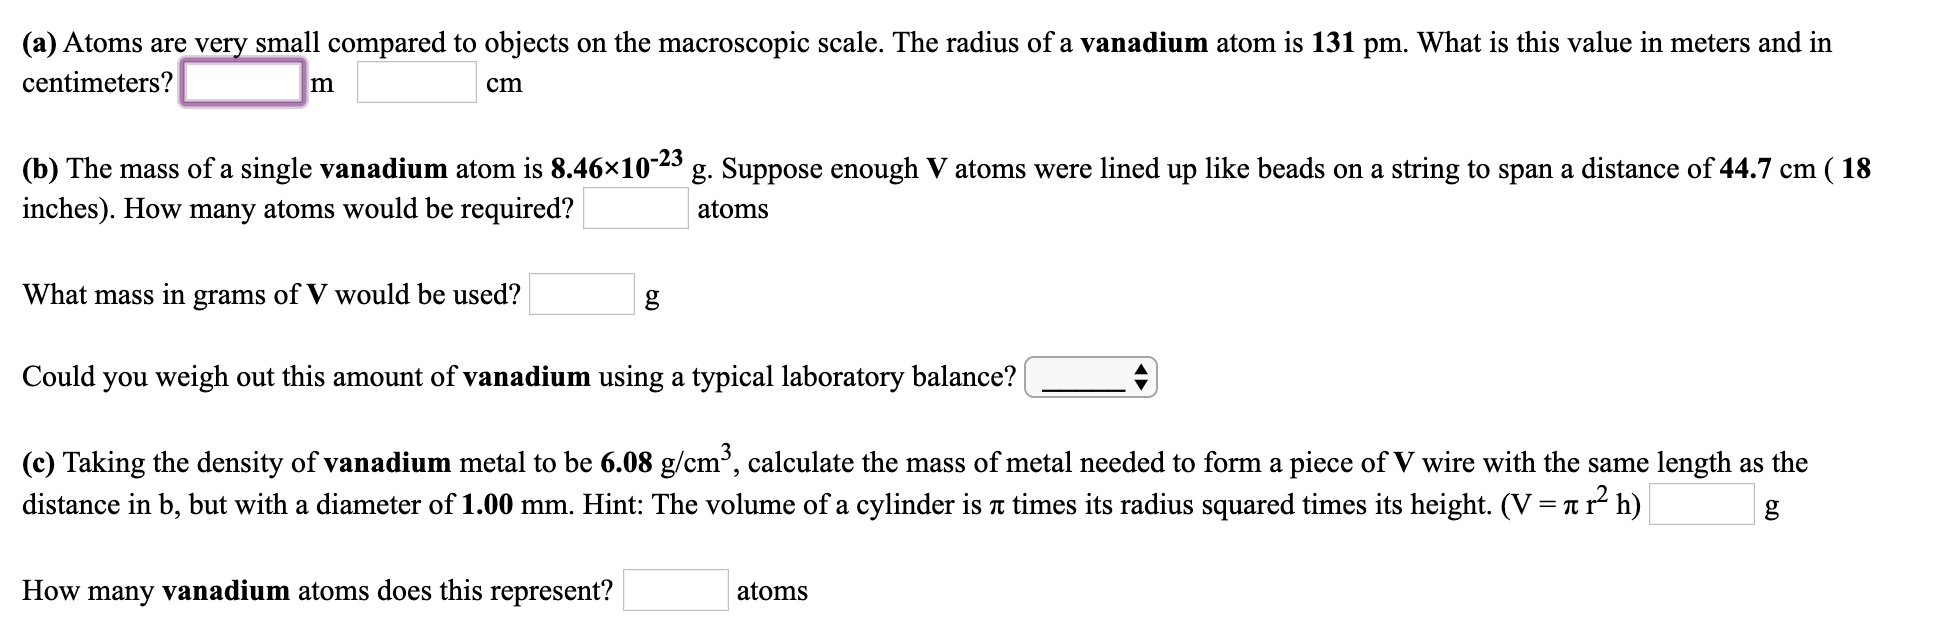 (a) Atoms are very small compared to objects on the macroscopic scale. The radius of a vanadium atom is 131 pm. What is this value in meters and in
centimeters?
cm
(b) The mass of a single vanadium atom is 8.46×10-23 g. Suppose enough V atoms were lined up like beads on a string to span a distance of 44.7 cm ( 18
atoms
inches). How many atoms would be required?
What mass in grams of V would be used?
Could you weigh out this amount of vanadium using a typical laboratory balance?
(c) Taking the density of vanadium metal to be 6.08 g/cm³, calculate the mass of metal needed to form a piece of V wire with the same length as the
distance in b, but with a diameter of 1.00 mm. Hint: The volume of a cylinder is T times its radius squared times its height. (V = T r² h)
How many vanadium atoms does this represent?
atoms
